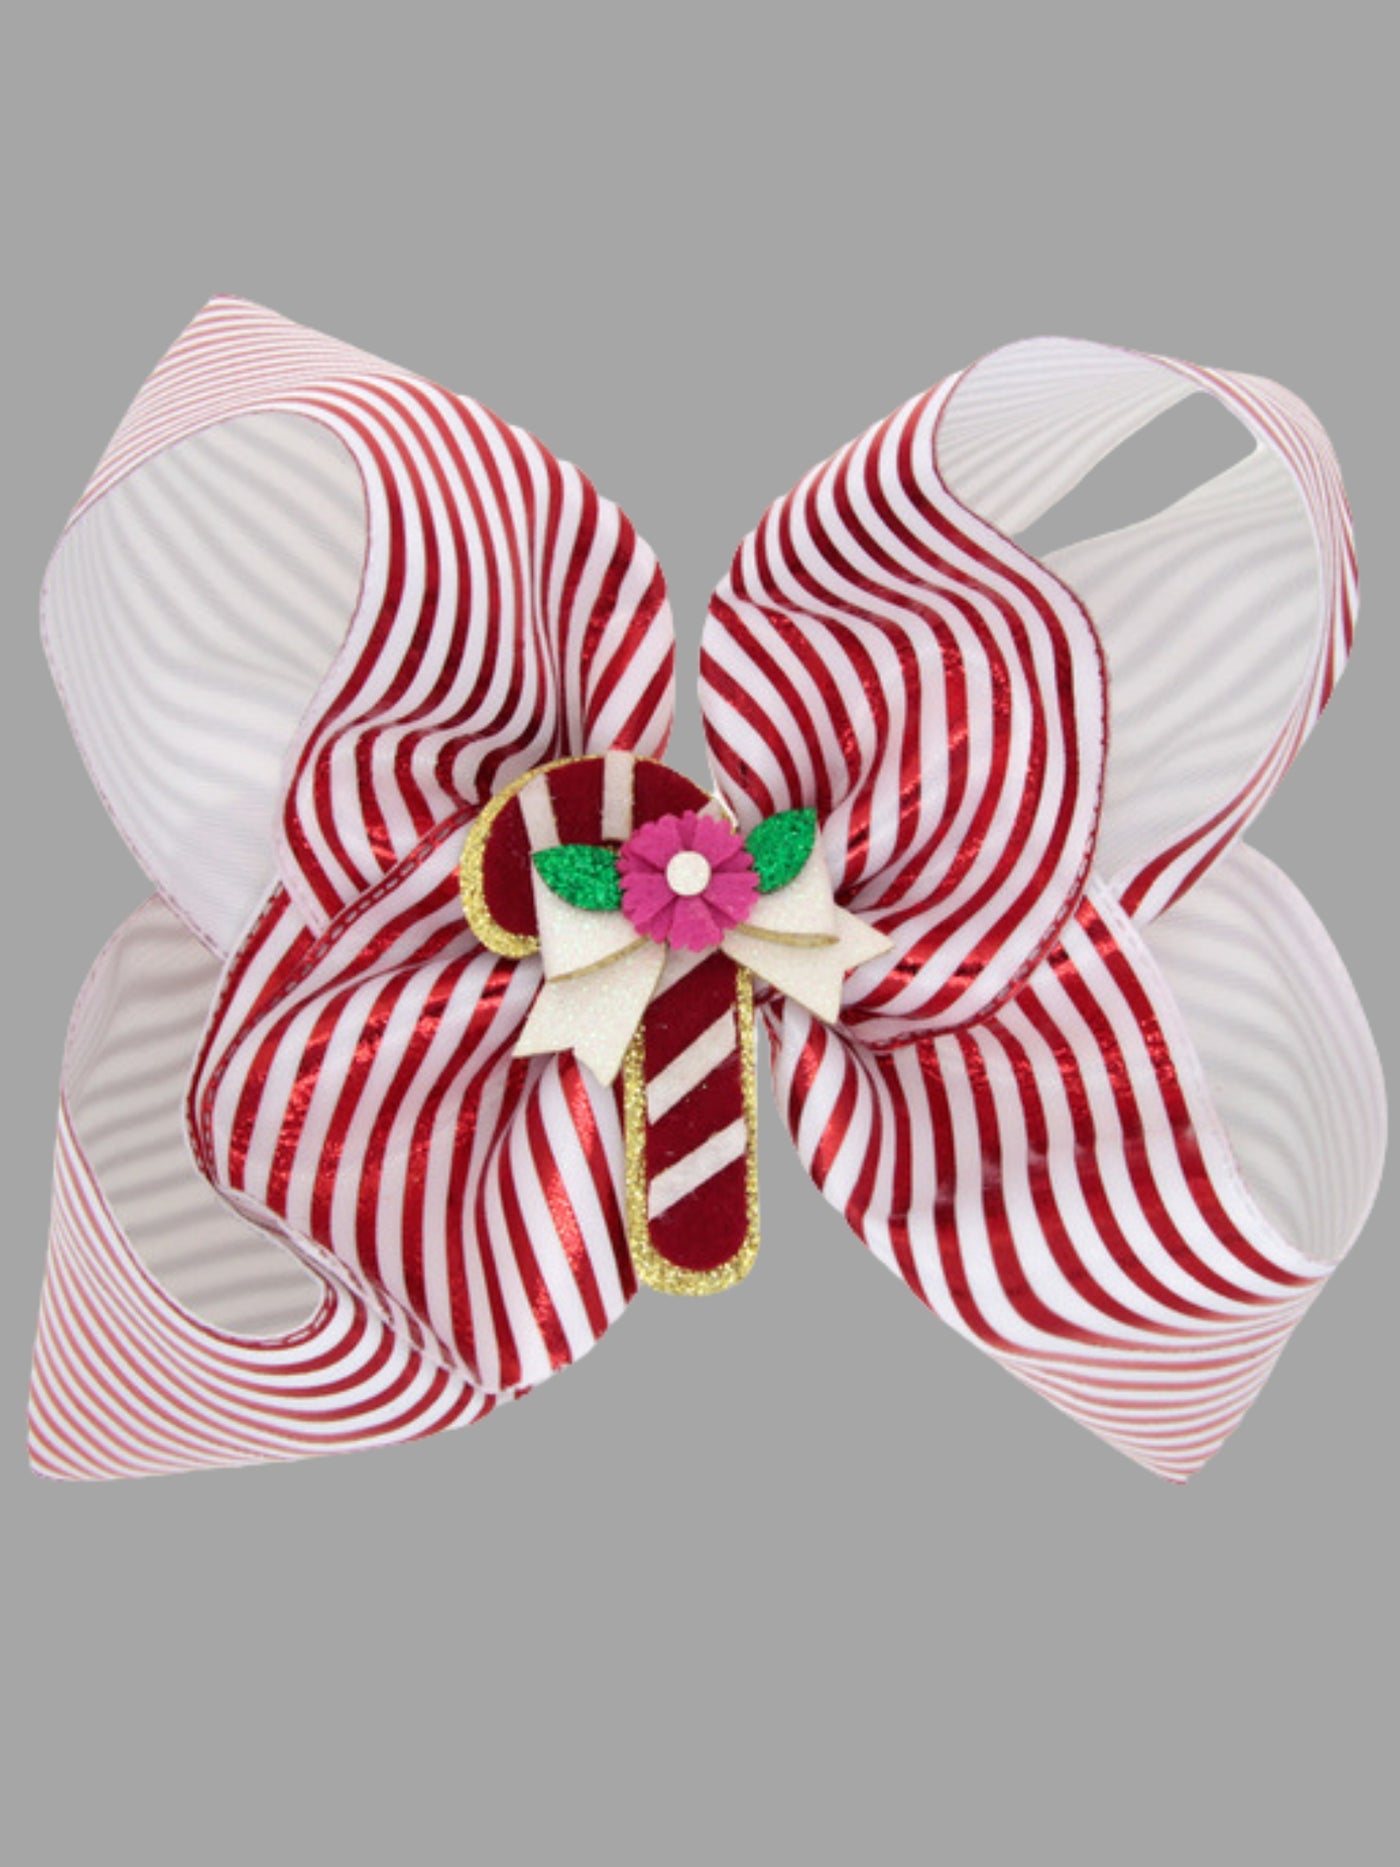 Cute Christmas Accessories | Girls Holiday Themed Five Inch Bow